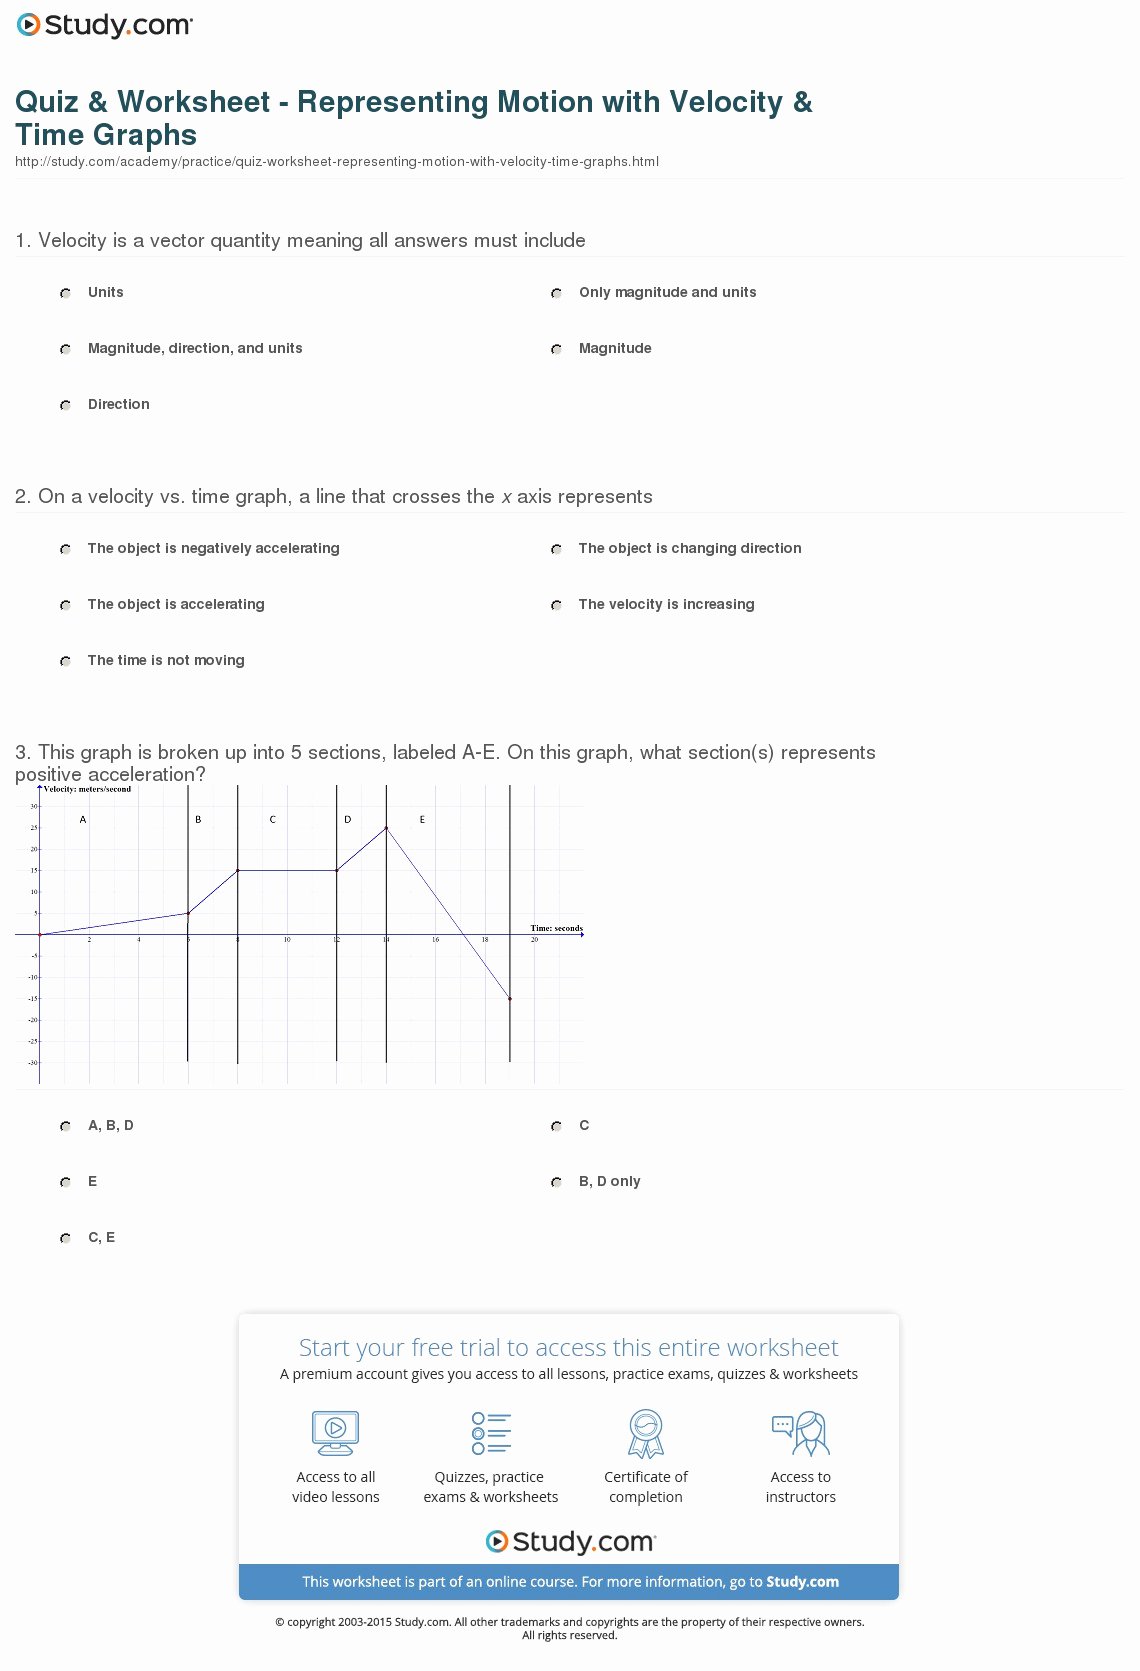 Motion Graphs Worksheet Answers New Quiz & Worksheet Representing Motion with Velocity